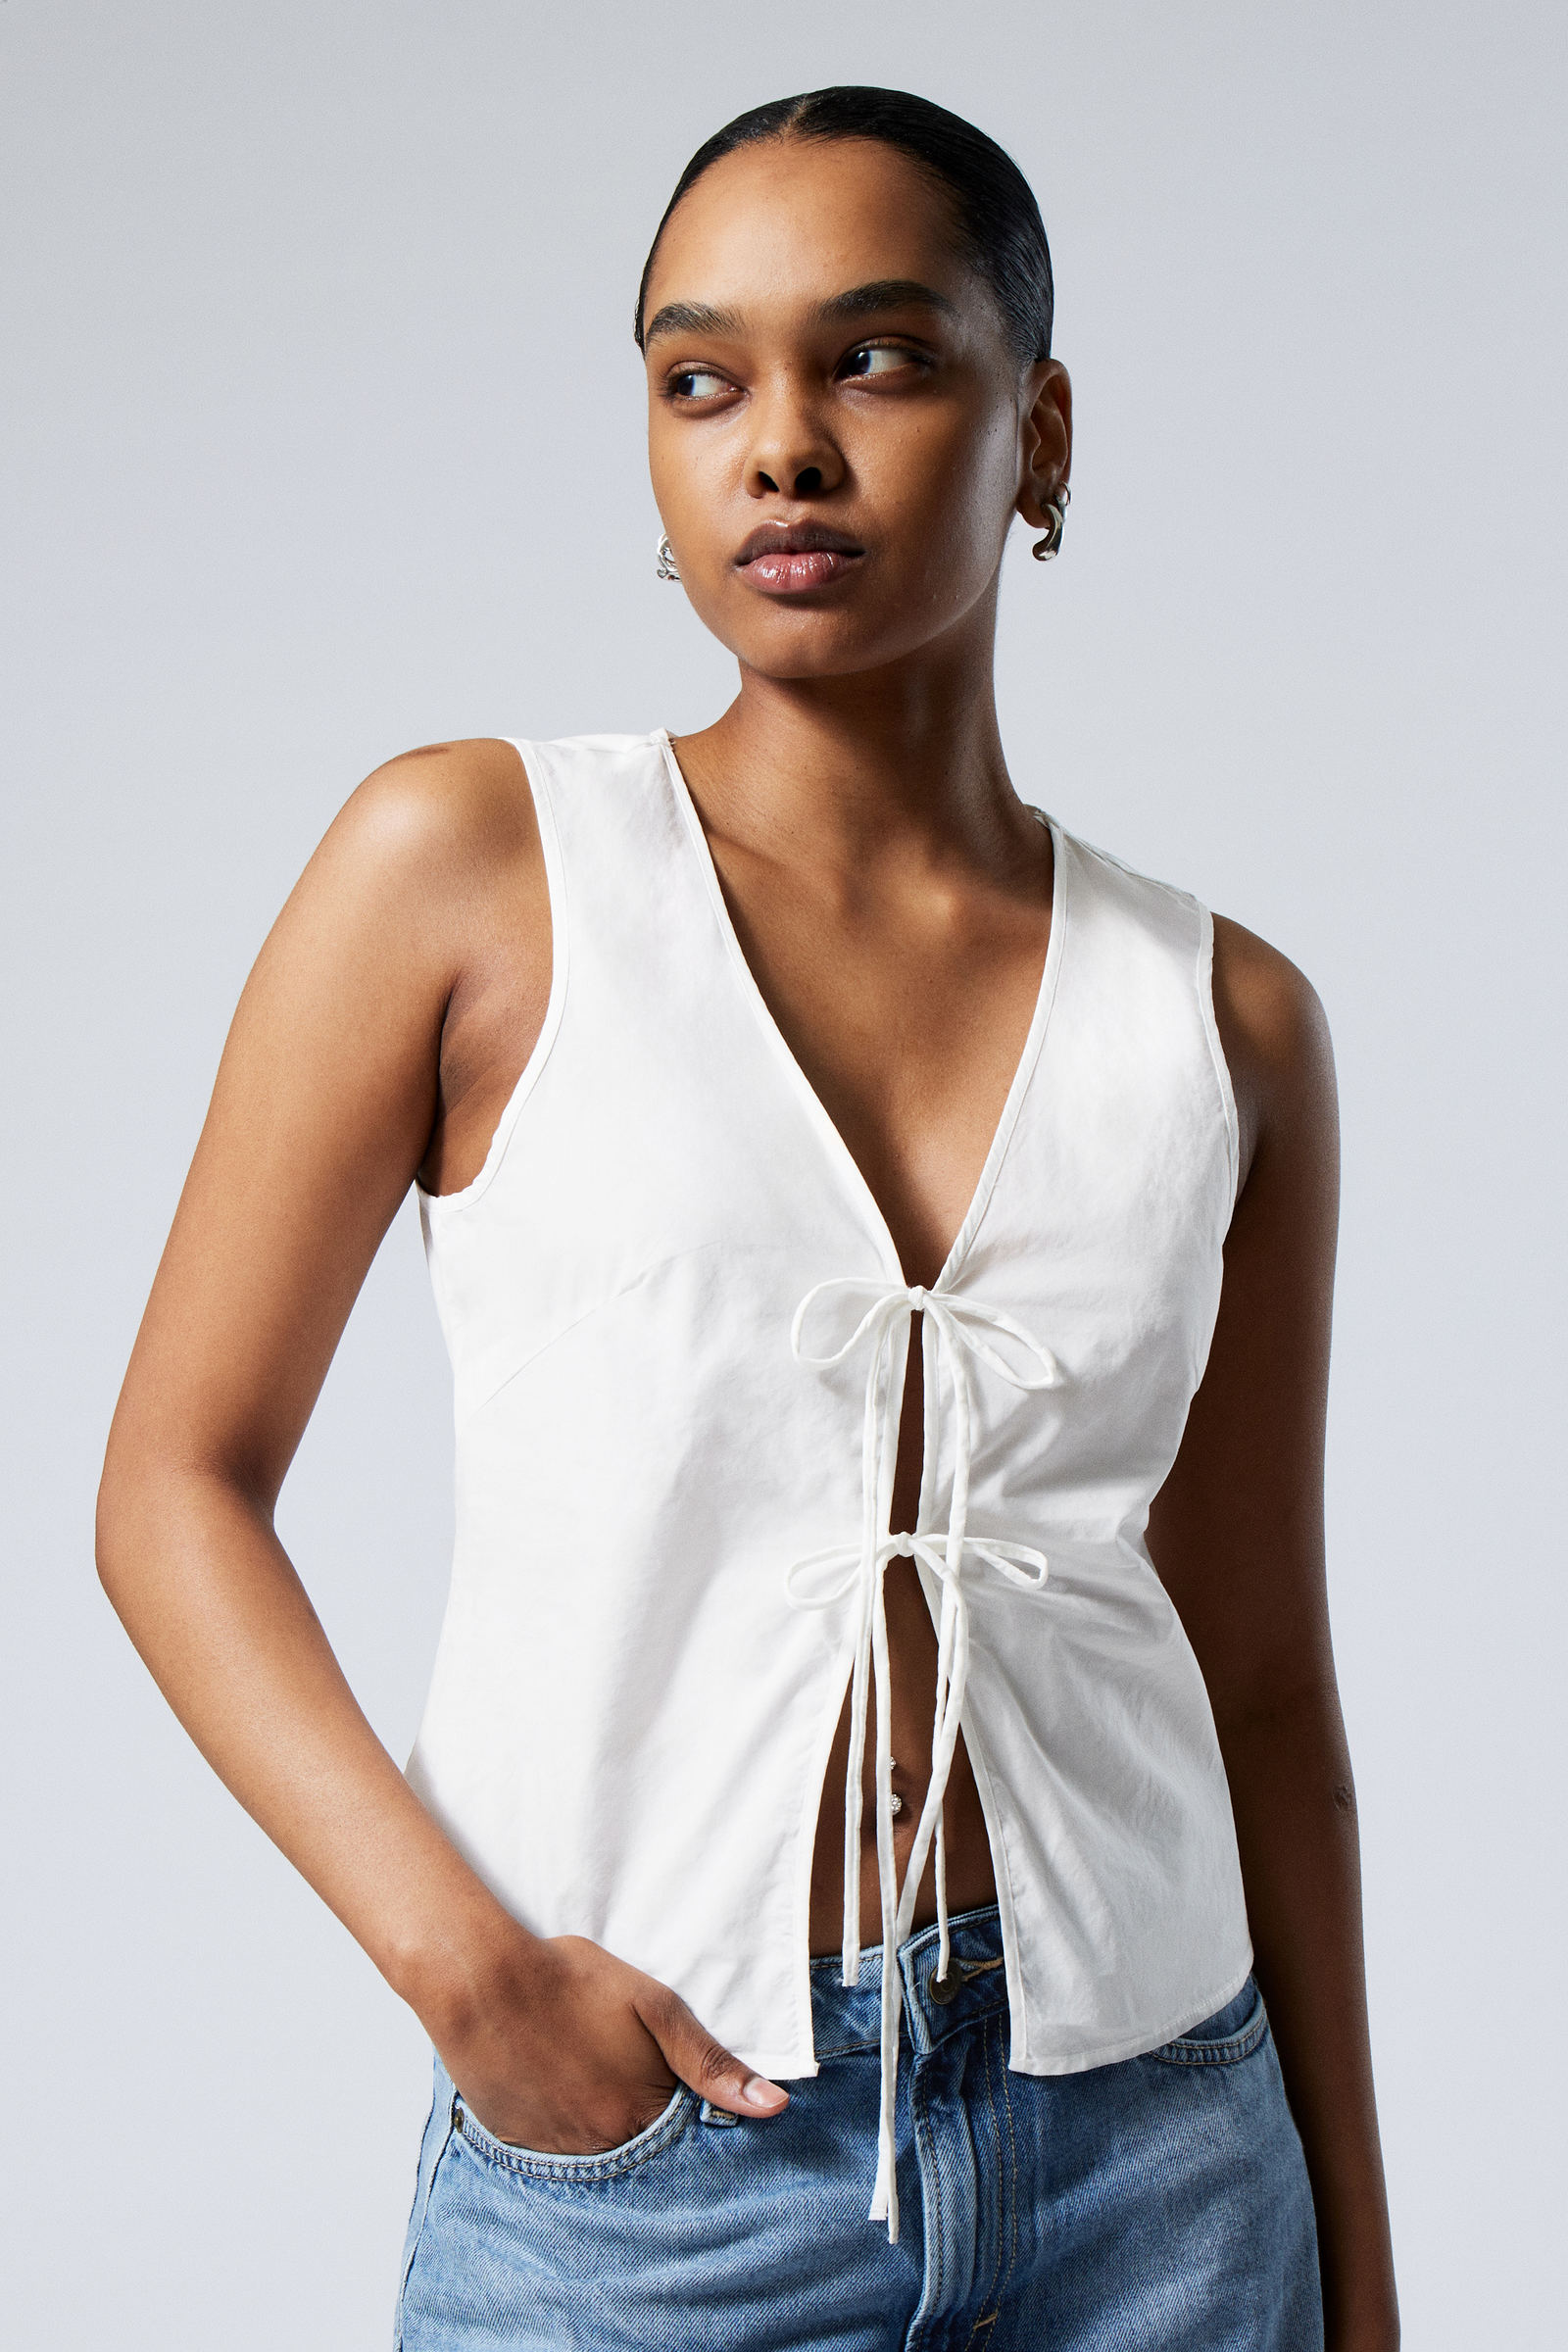 Women's Shirts and Blouses - Shop Tops Online